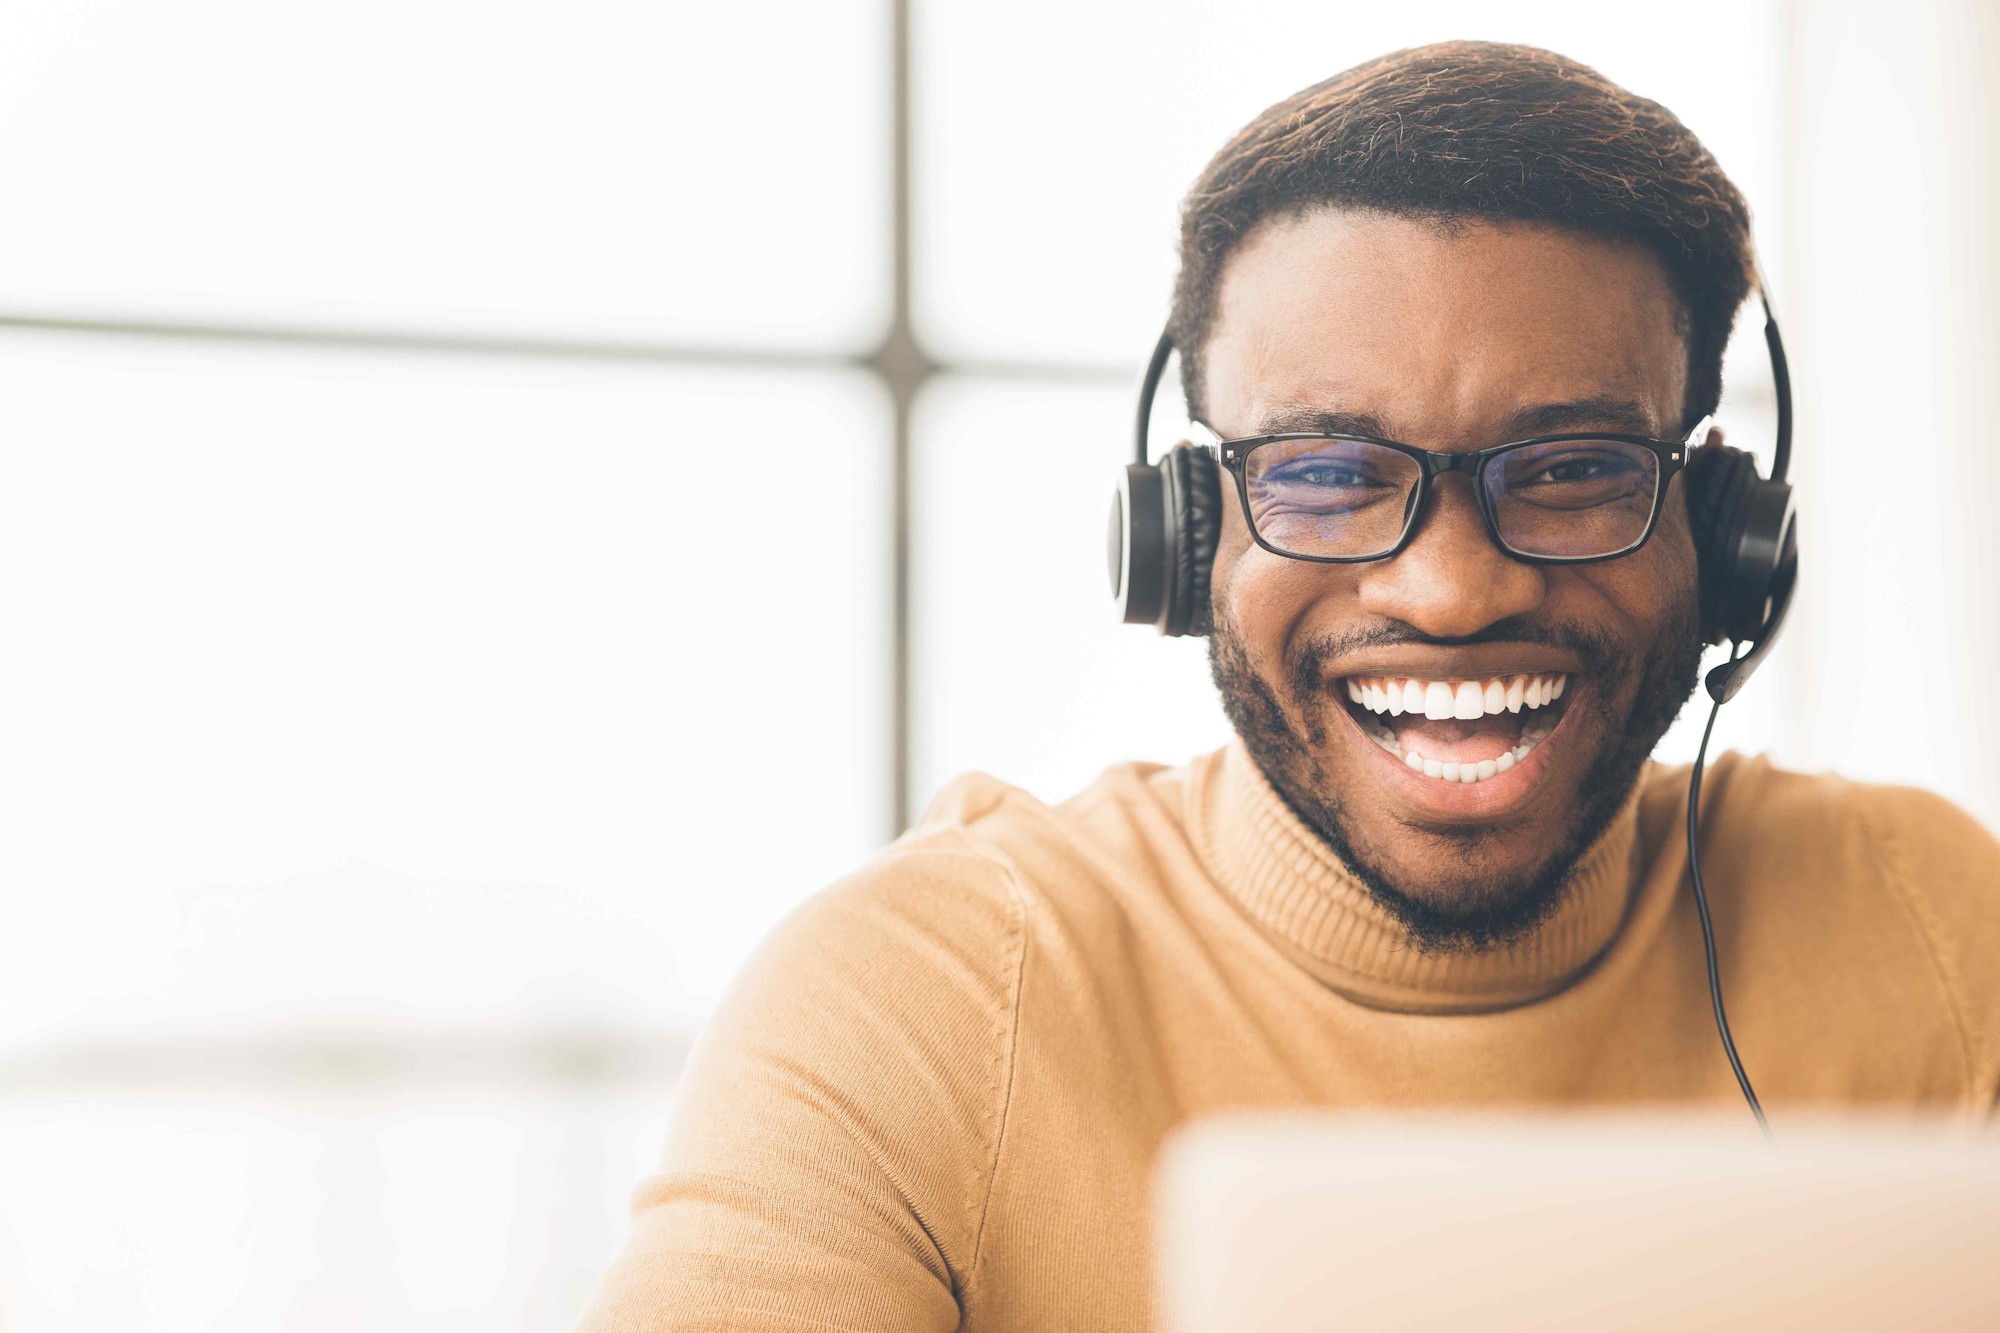 Man with headset on laughing